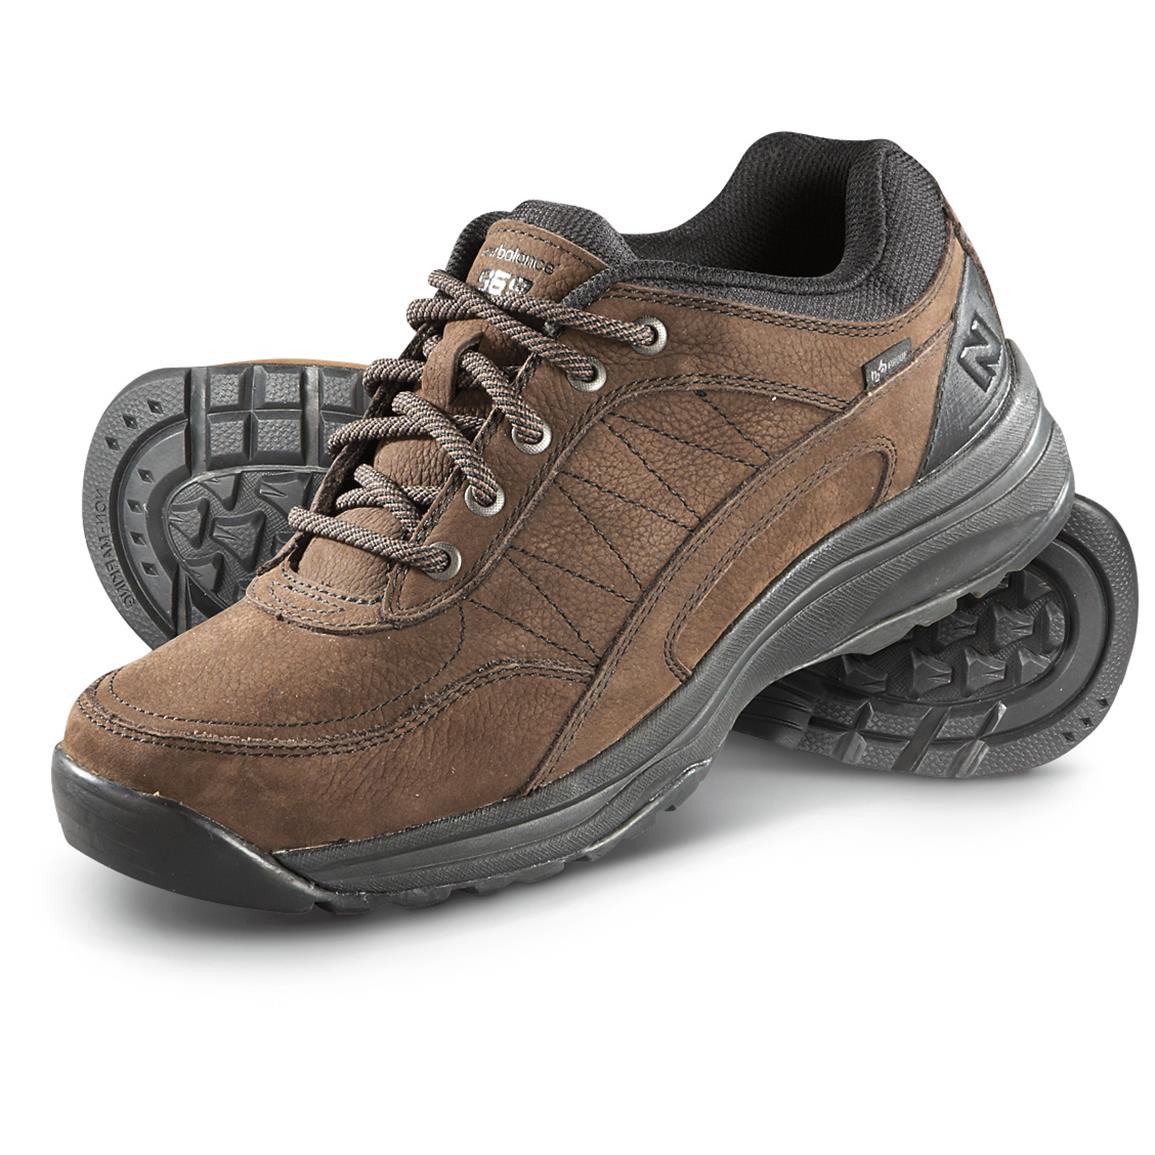 New Balance Men's 969 Country Walker Athletic Shoes, Brown - 591296 ...